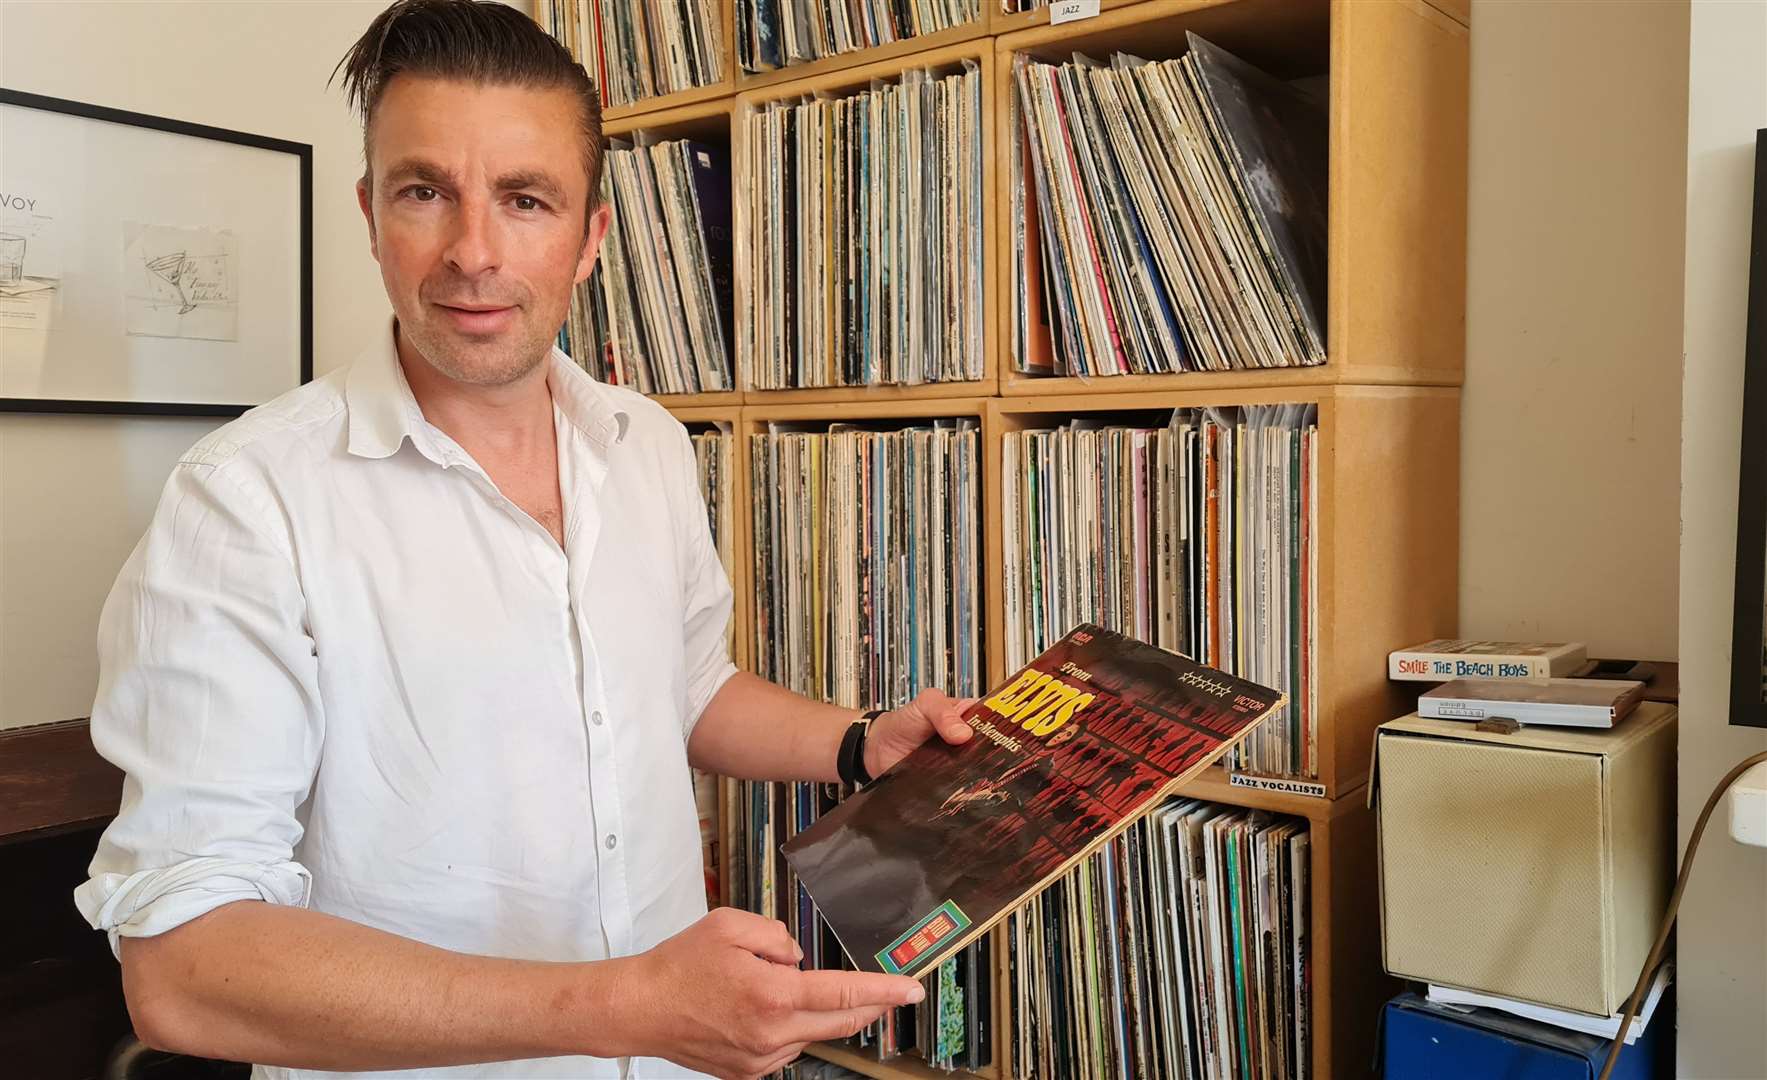 Jon Nickoll has more than 1,000 albums in his eclectic vinyl collection